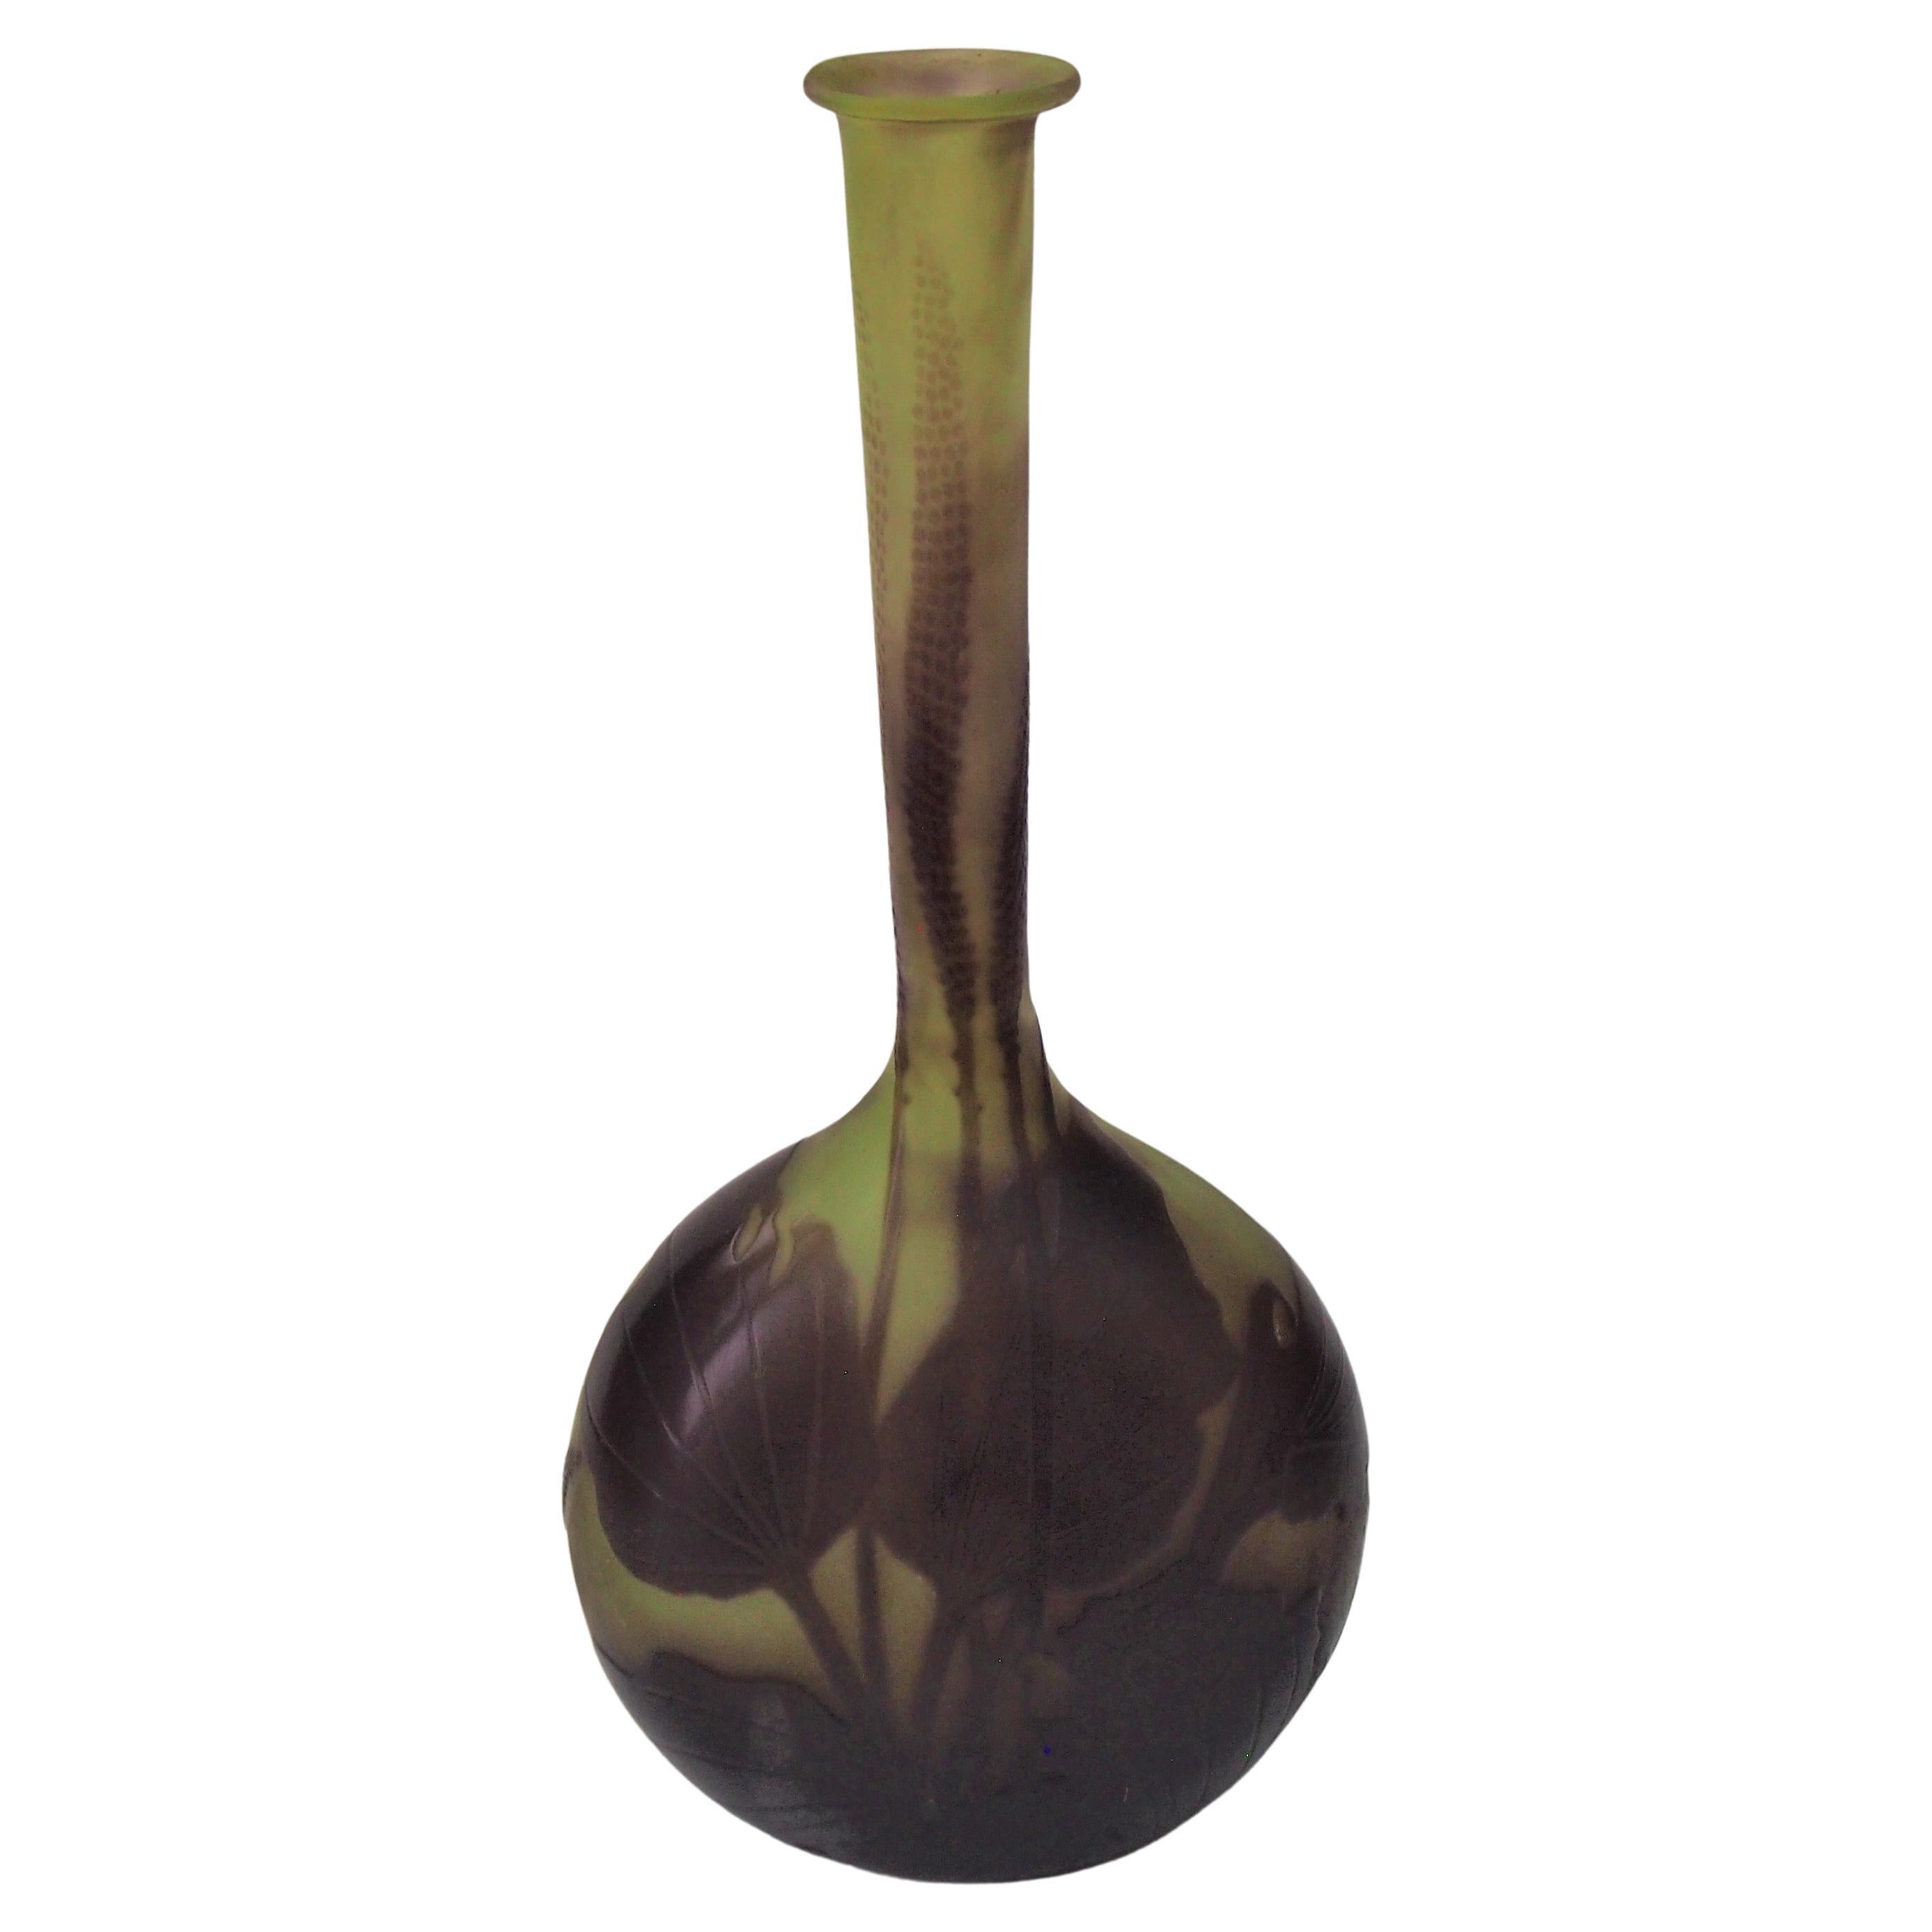 French Art Nouveau Emile Galle Cameo Glass Tall Botanical Banjo Vase, circa 1908 For Sale